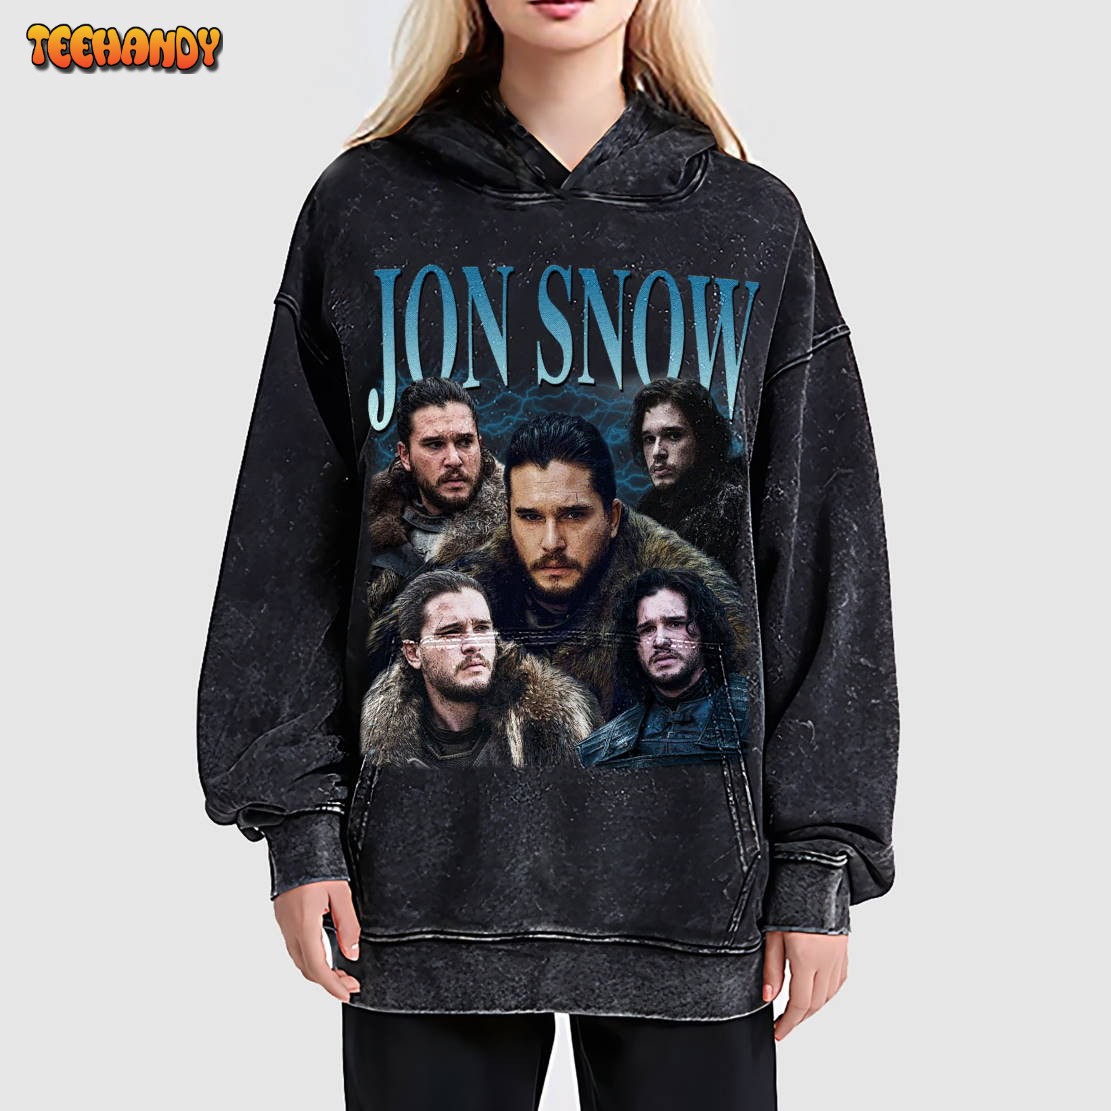 Jon Snow Vintage Washed T-Shirt,Actor Homage T